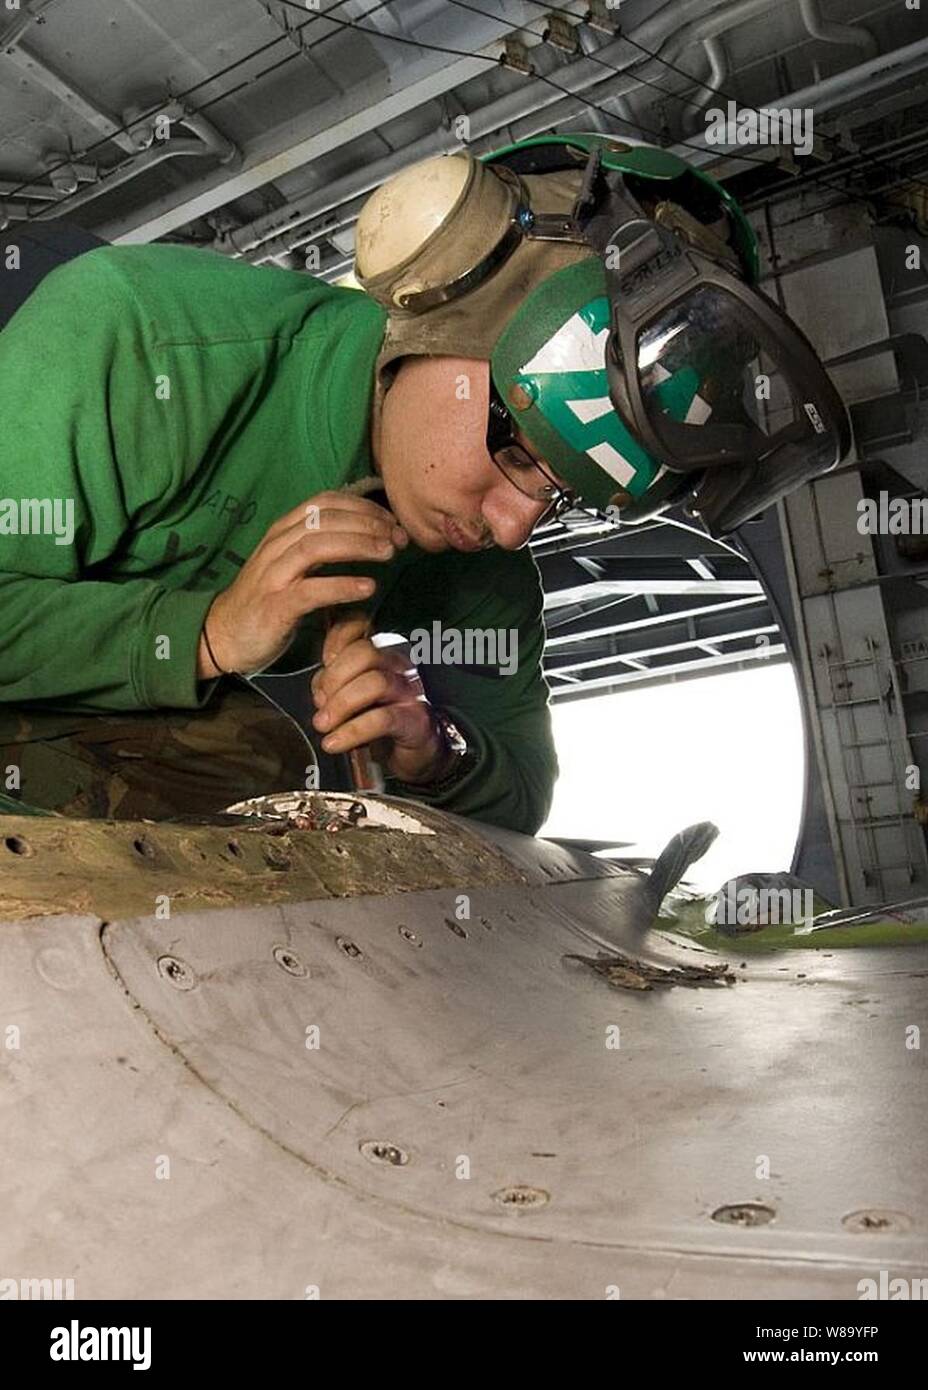 Petty Officer 3rd Class Luke Spataro performs corrosion control on an F/A-18E Super Hornet aboard the aircraft carrier USS George Washington (CVN 73) in the Pacific Ocean on Nov. 26, 2010.  The George Washington is on patrol in the western Pacific Ocean helping to ensure security and stability. Stock Photo